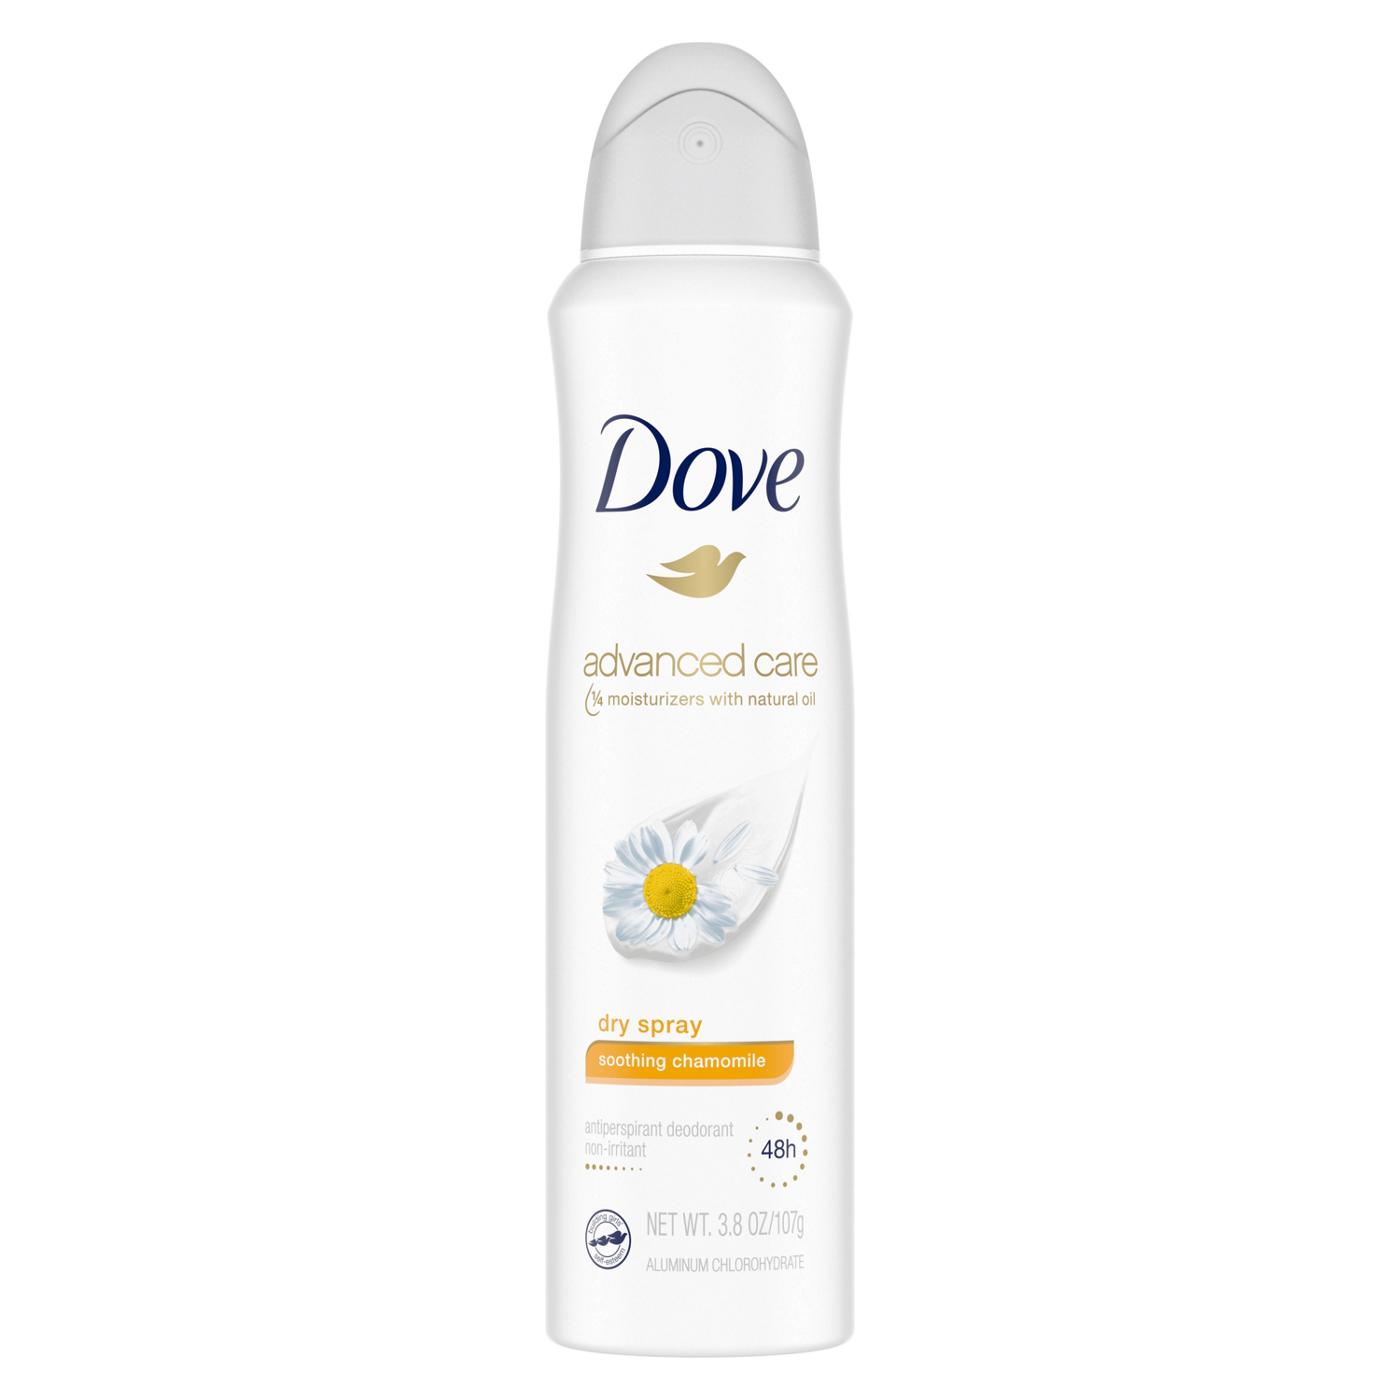 Dove Advanced Care Soothing Chamomile Dry Spray Antiperspirant Deodorant; image 1 of 3